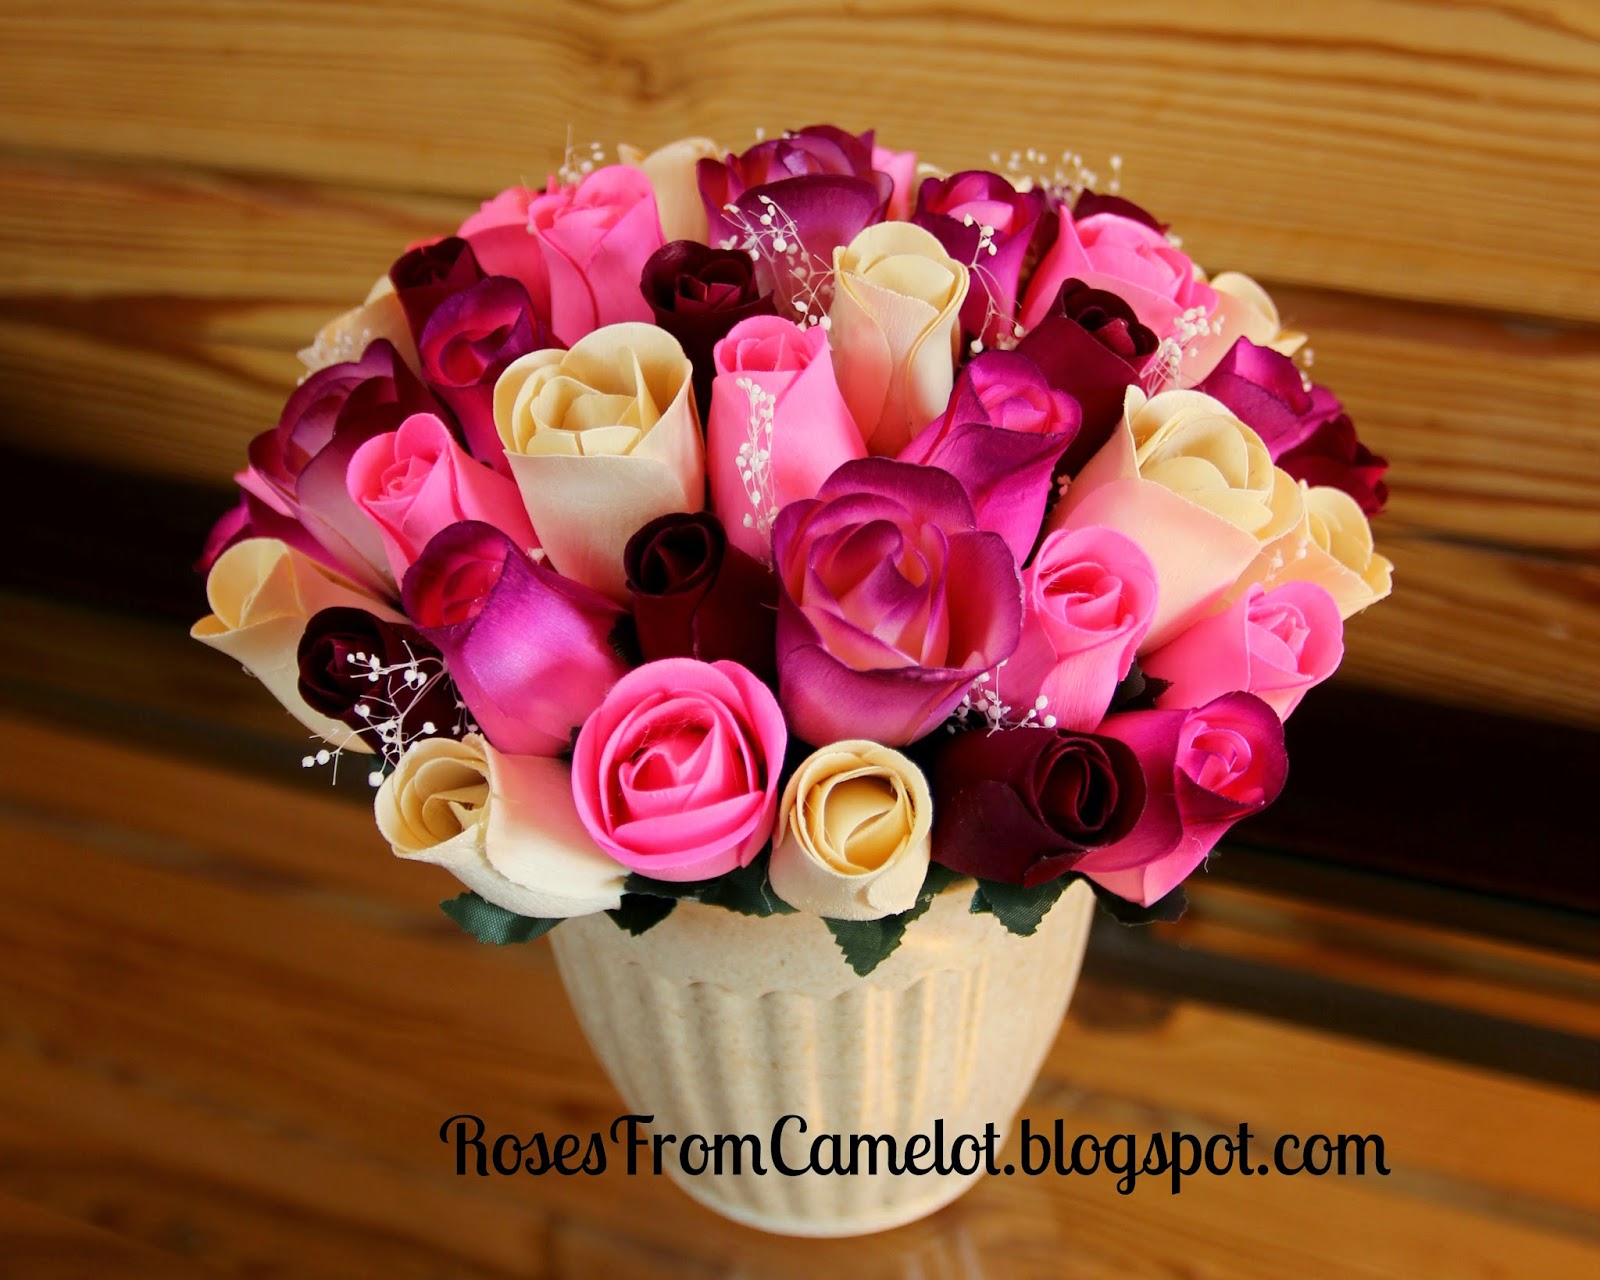 Wooden Roses From Camelot